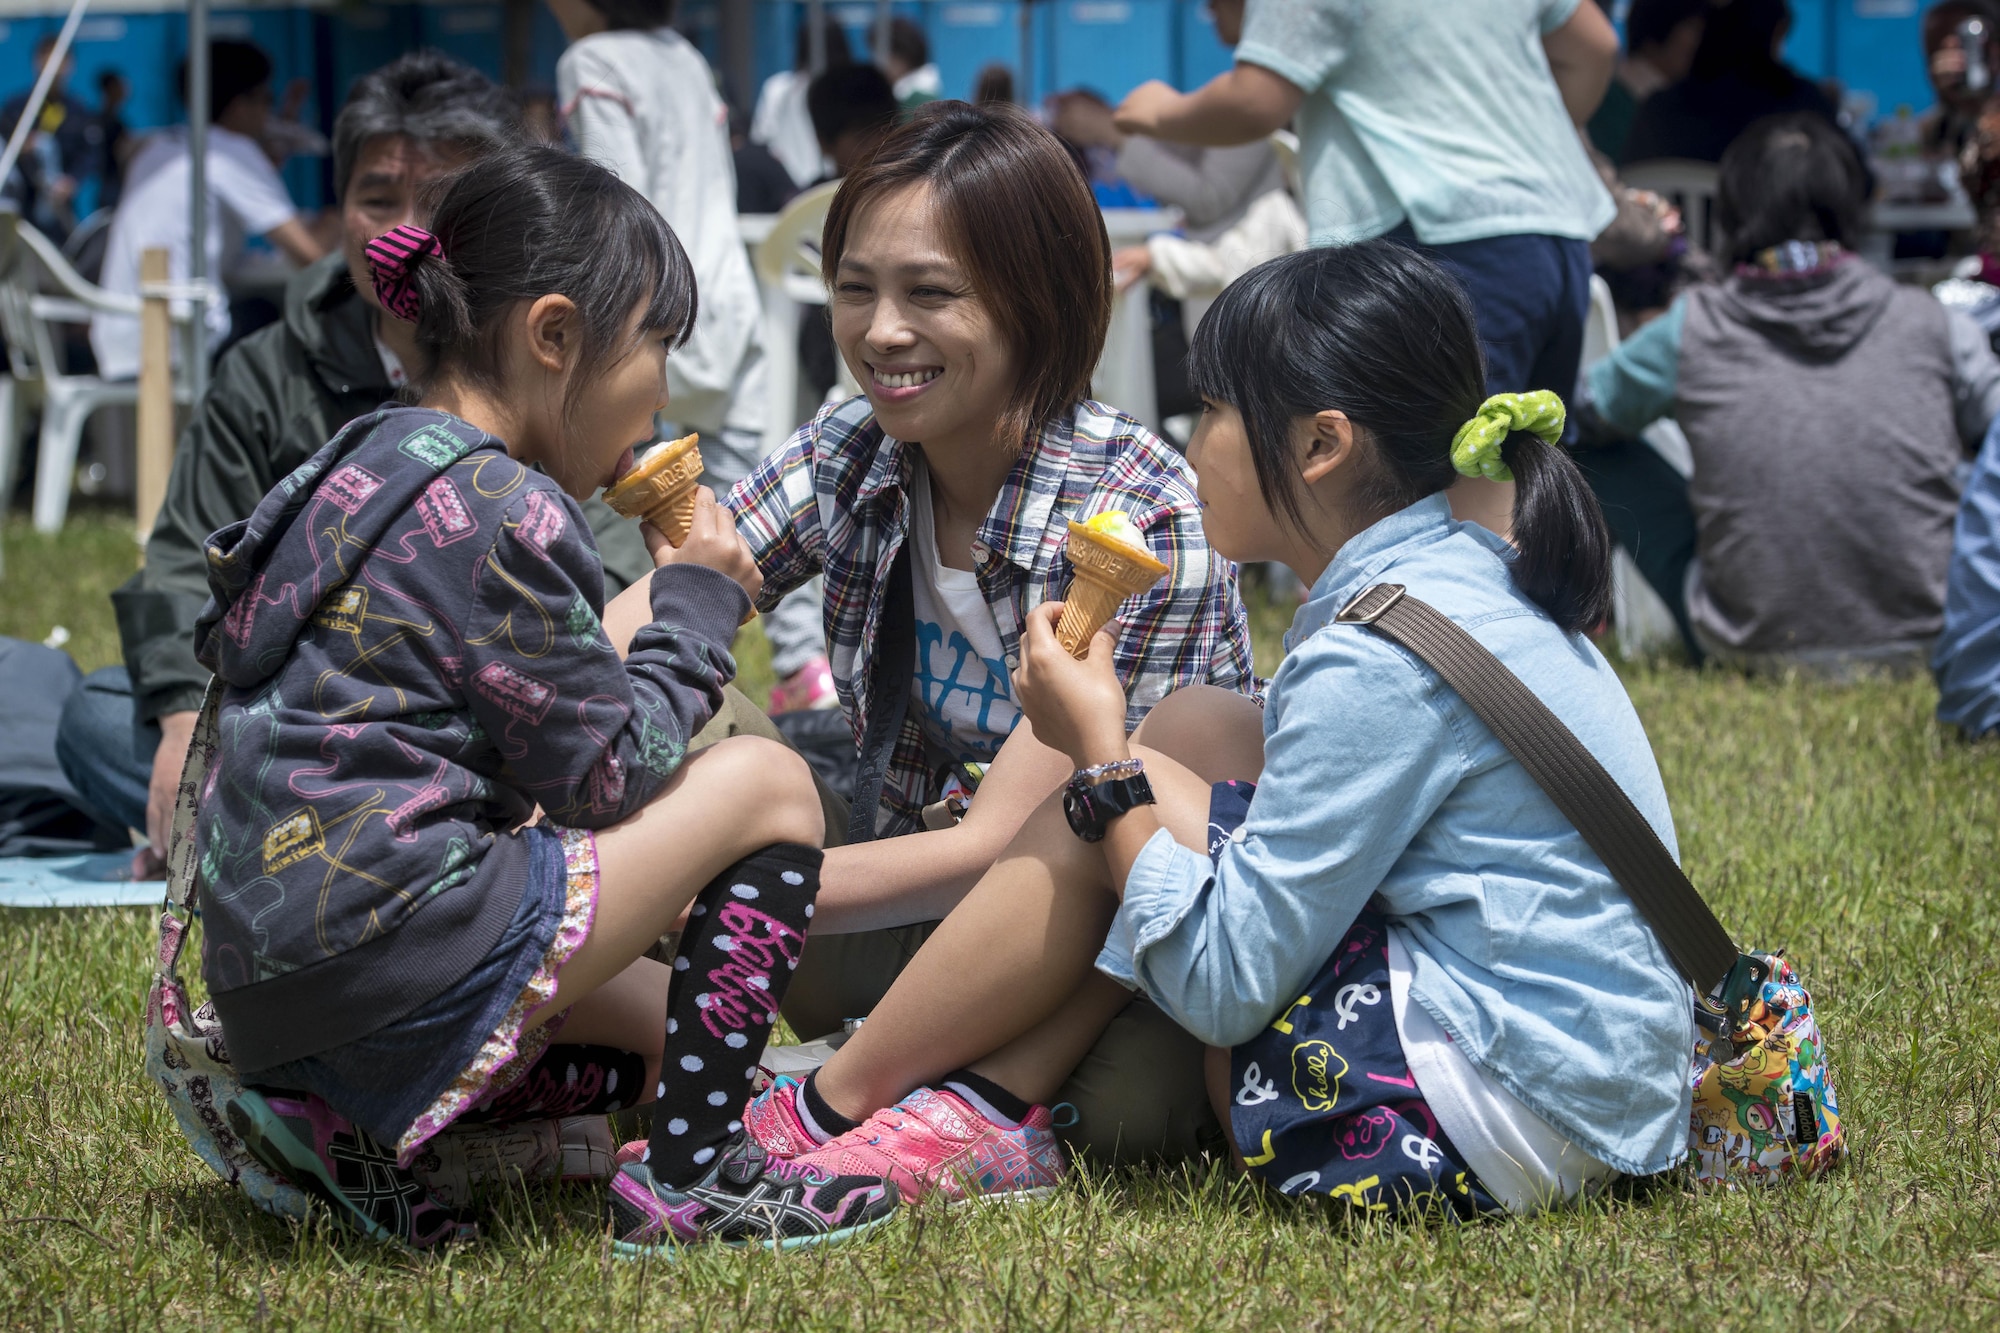 A Japanese mother and her two daughters enjoy ice cream cones during the 28th Annual American Day in Misawa City, Japan, June 5, 2016. Showcasing the region’s bilateral partnership among U.S. military and Japanese residents, more than 80,000 annual attendees interacted with volunteers from private base organizations at various American-based food booths sharing a taste of home. Americans and Japanese residents also participated in activities such as a family fun run, an American-themed parade, sports tournaments, street performances and a haunted house. (U.S. Air Force photo by Staff Sgt. Benjamin W. Stratton)